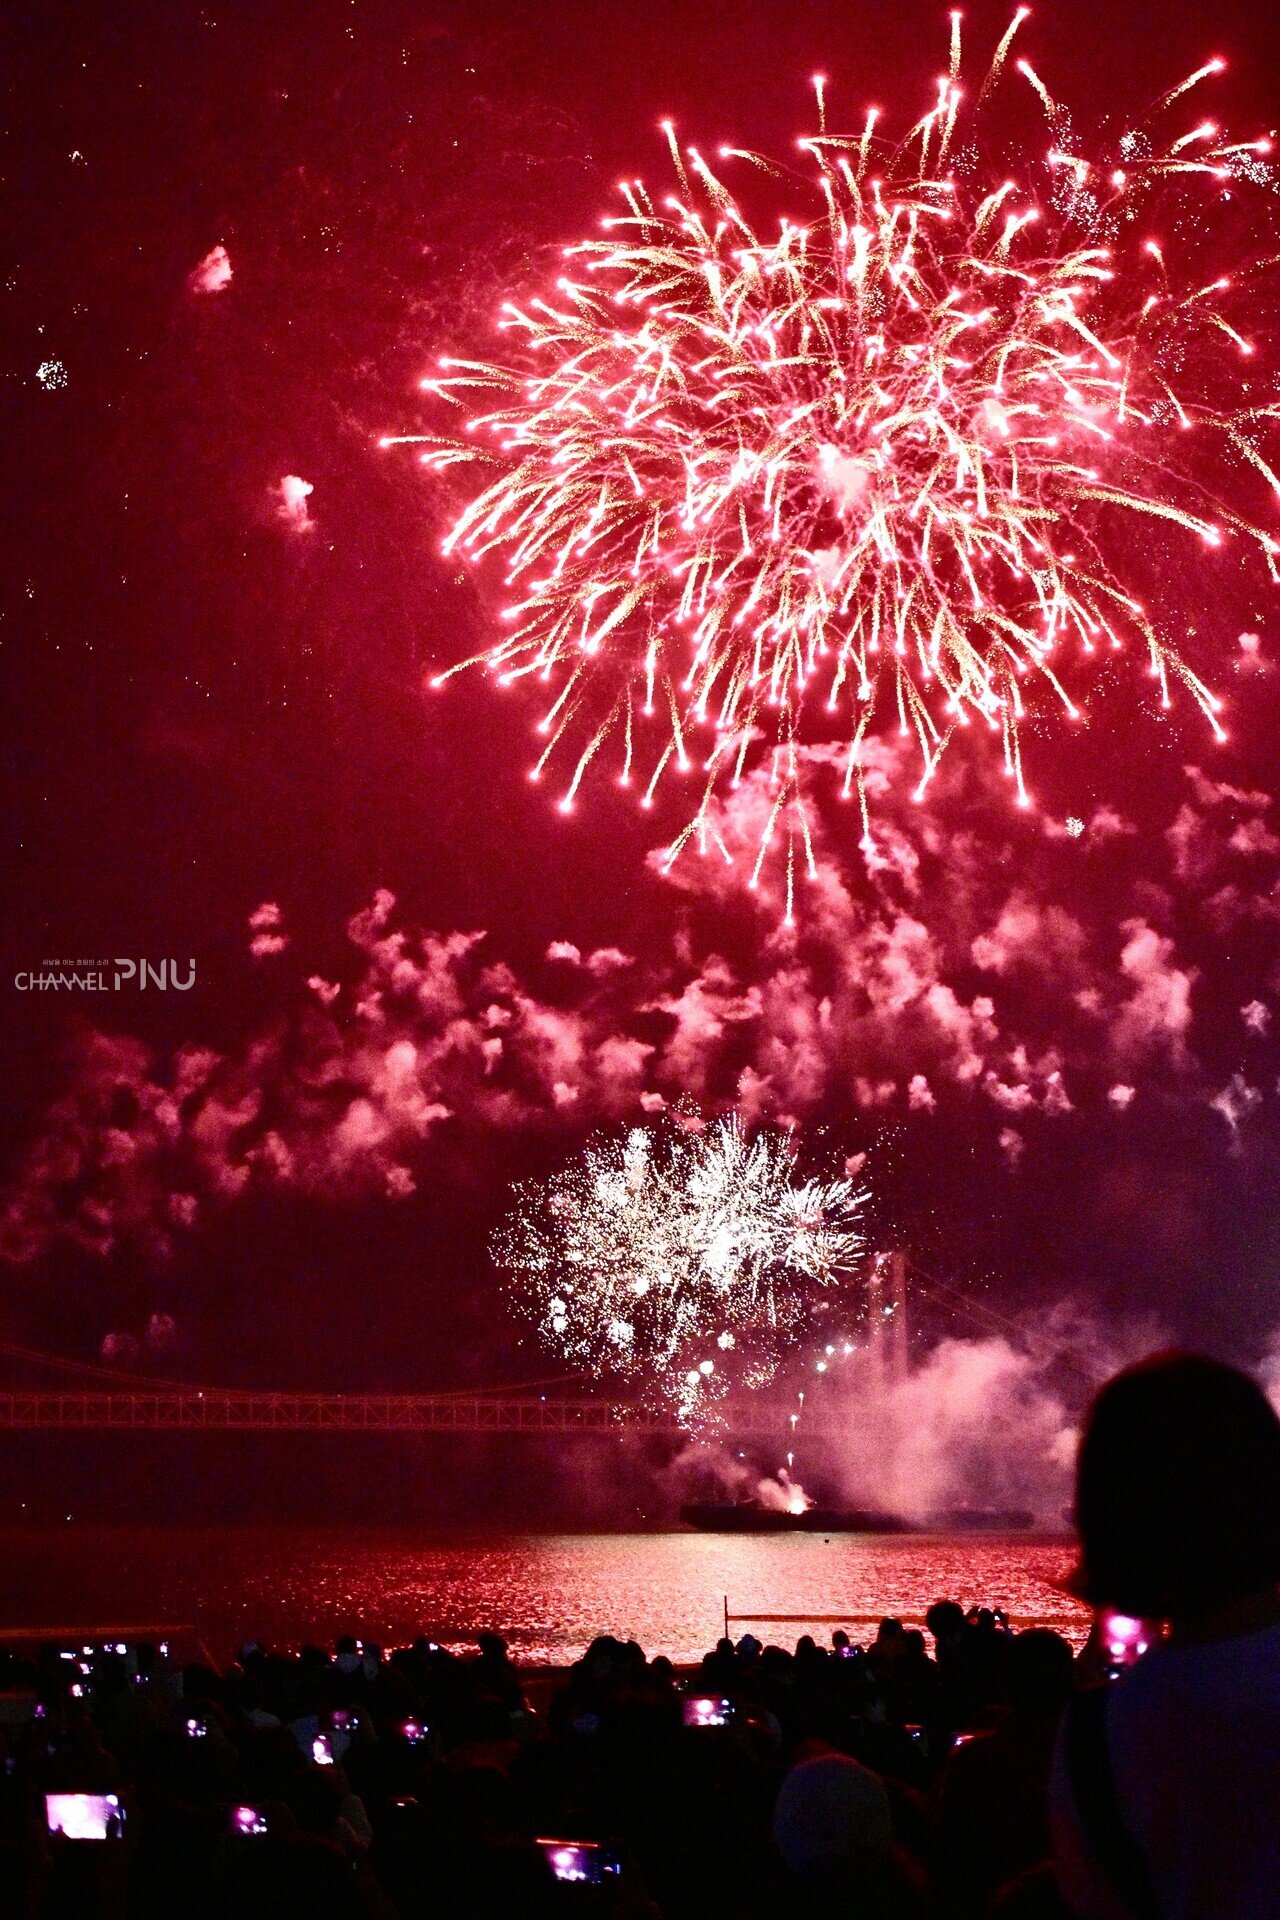 A new firework explodes above the hazy smoke from the one that just went off a moment ago. (Jun Hyung-Seo, Reporter)